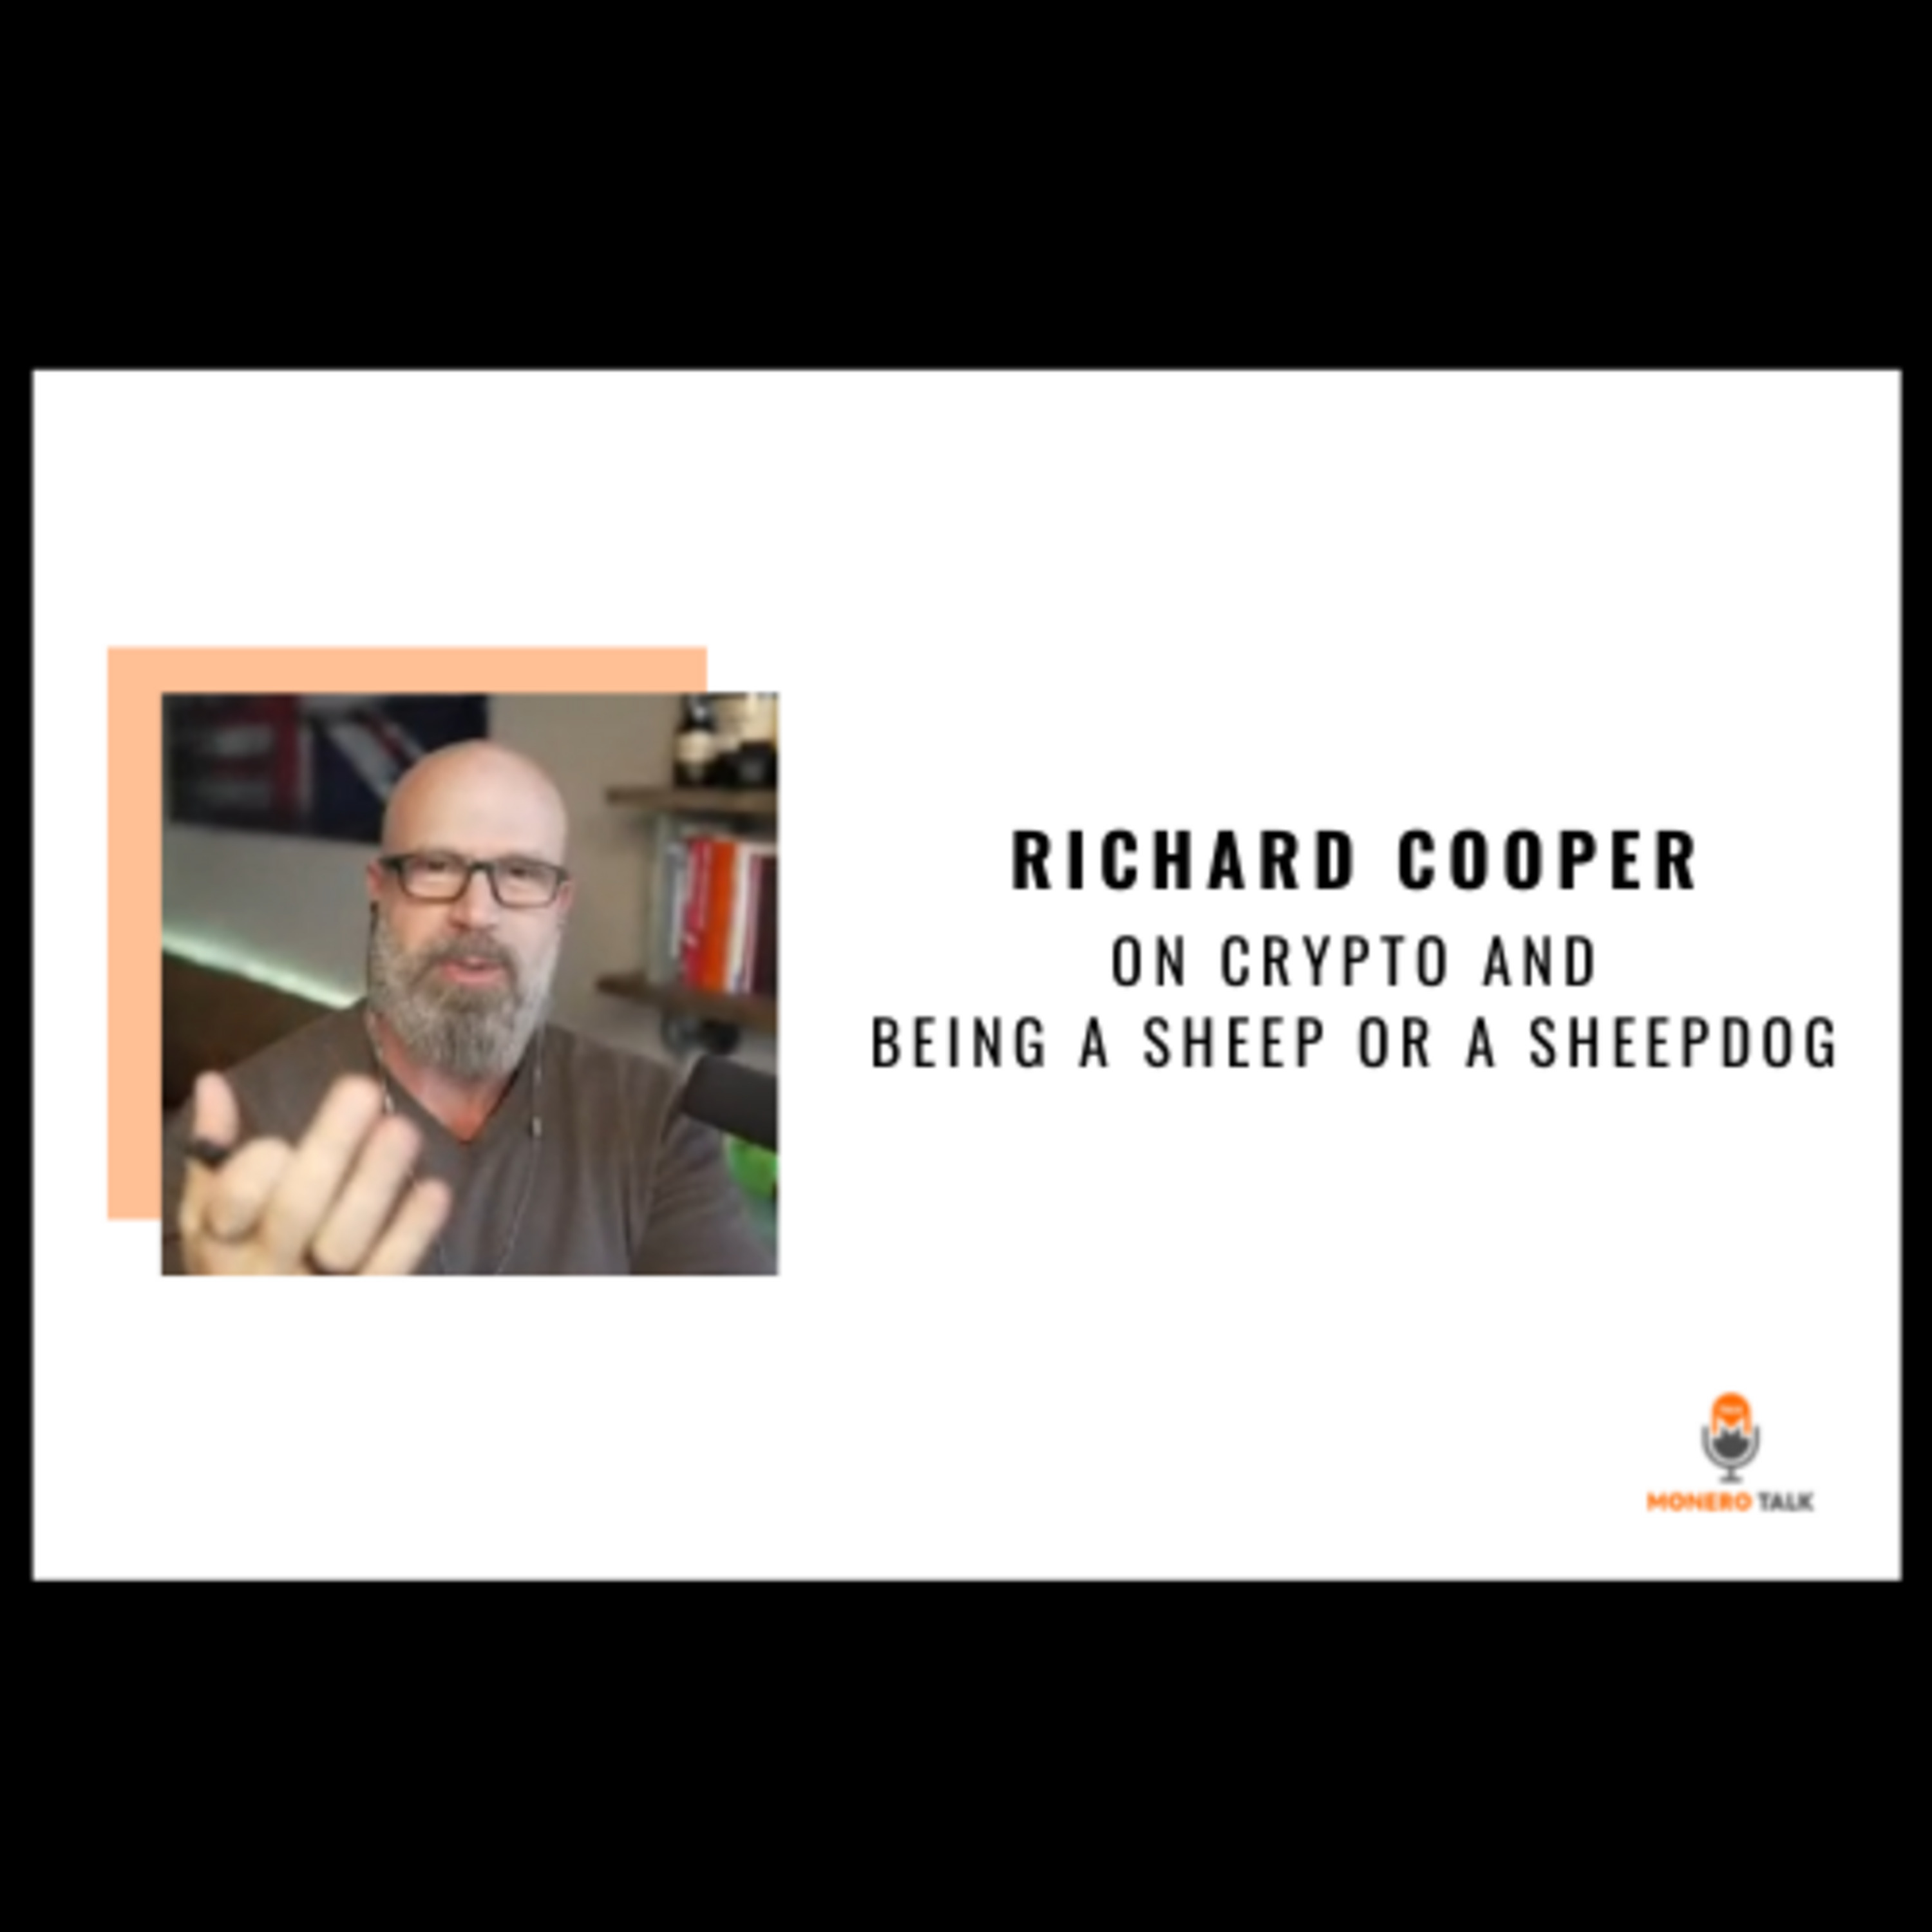 Richard Cooper on Crypto and being a sheep or sheepdog